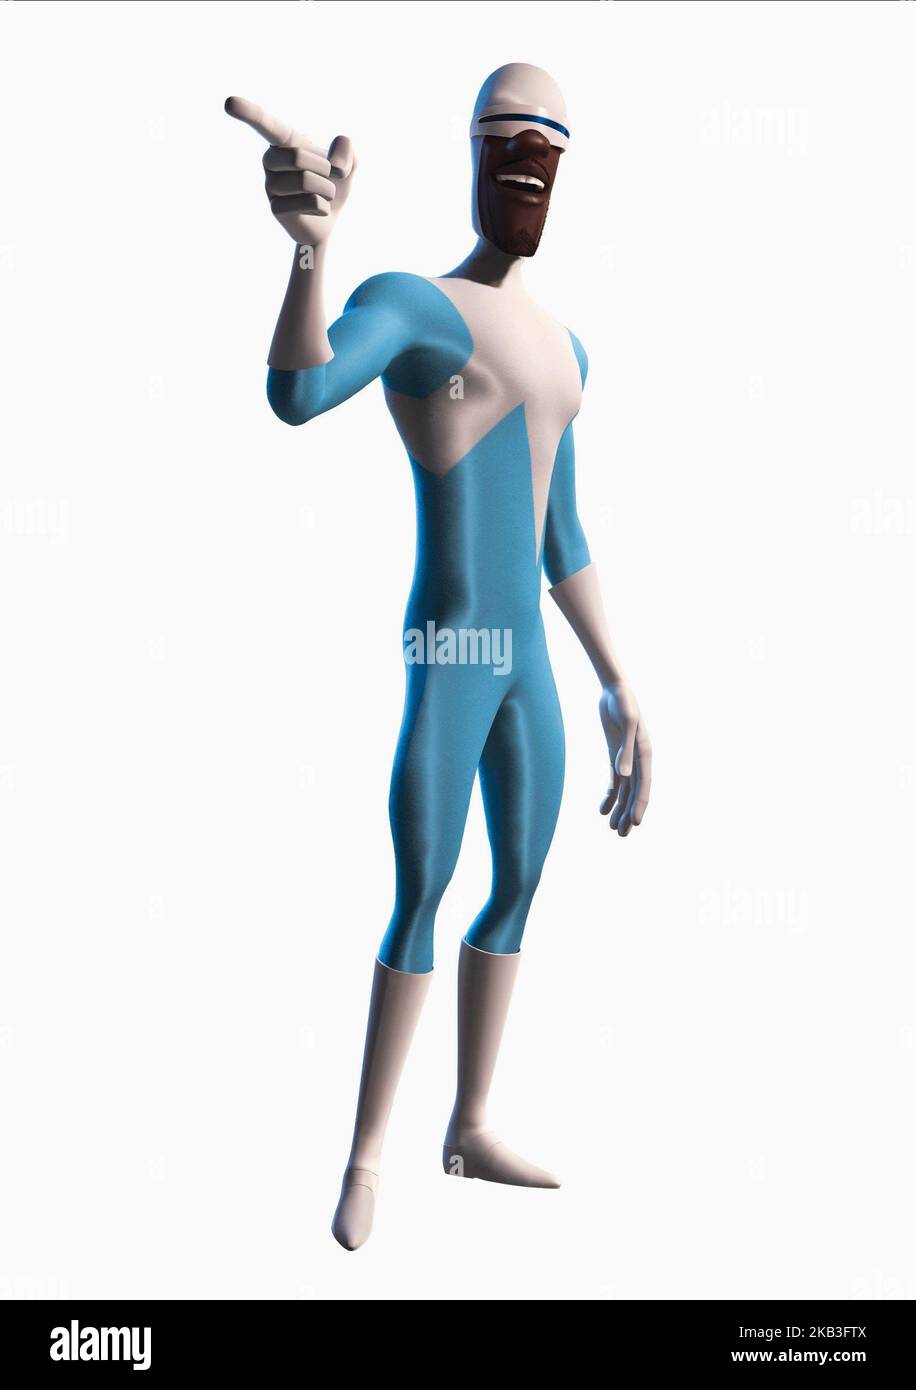 THE INCREDIBLES, FROZONE AKA LUCIUS BEST, 2004 Stock Photo